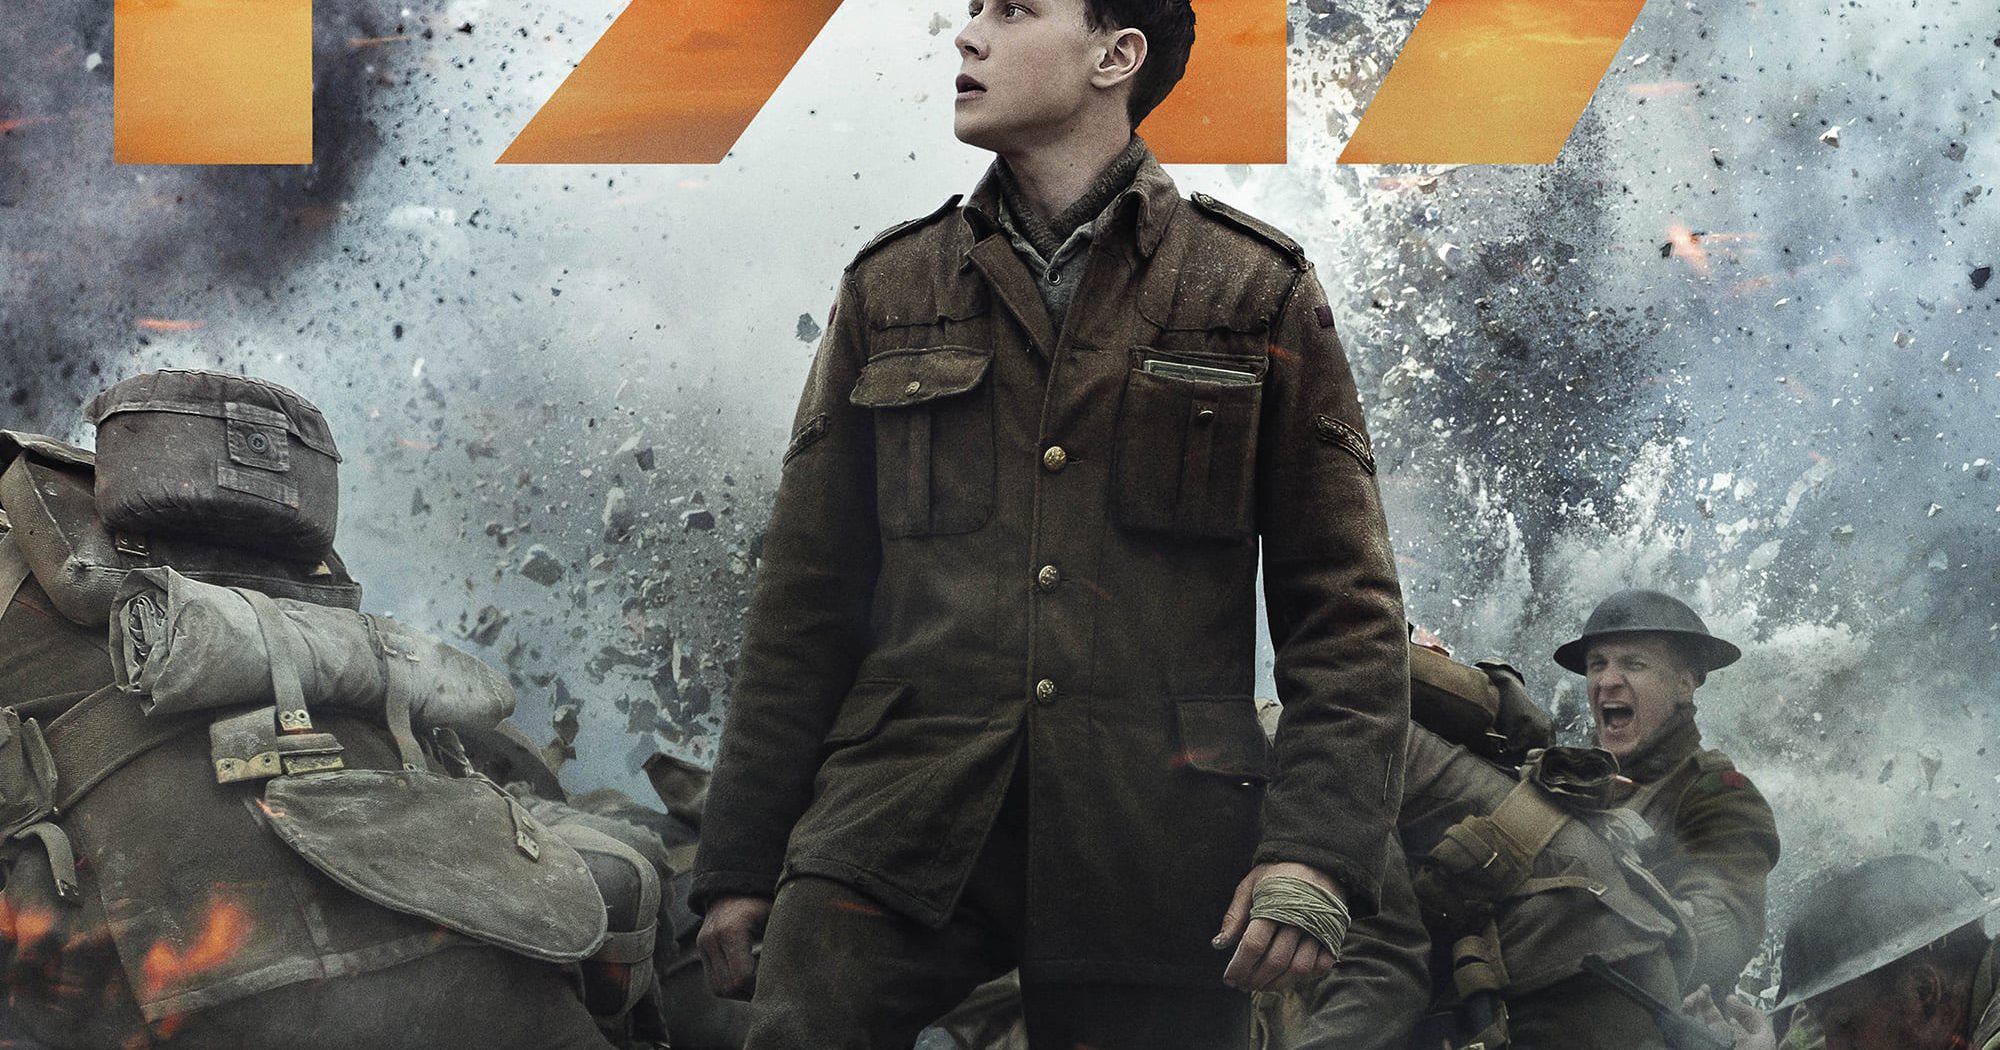 Poster for the movie "1917"